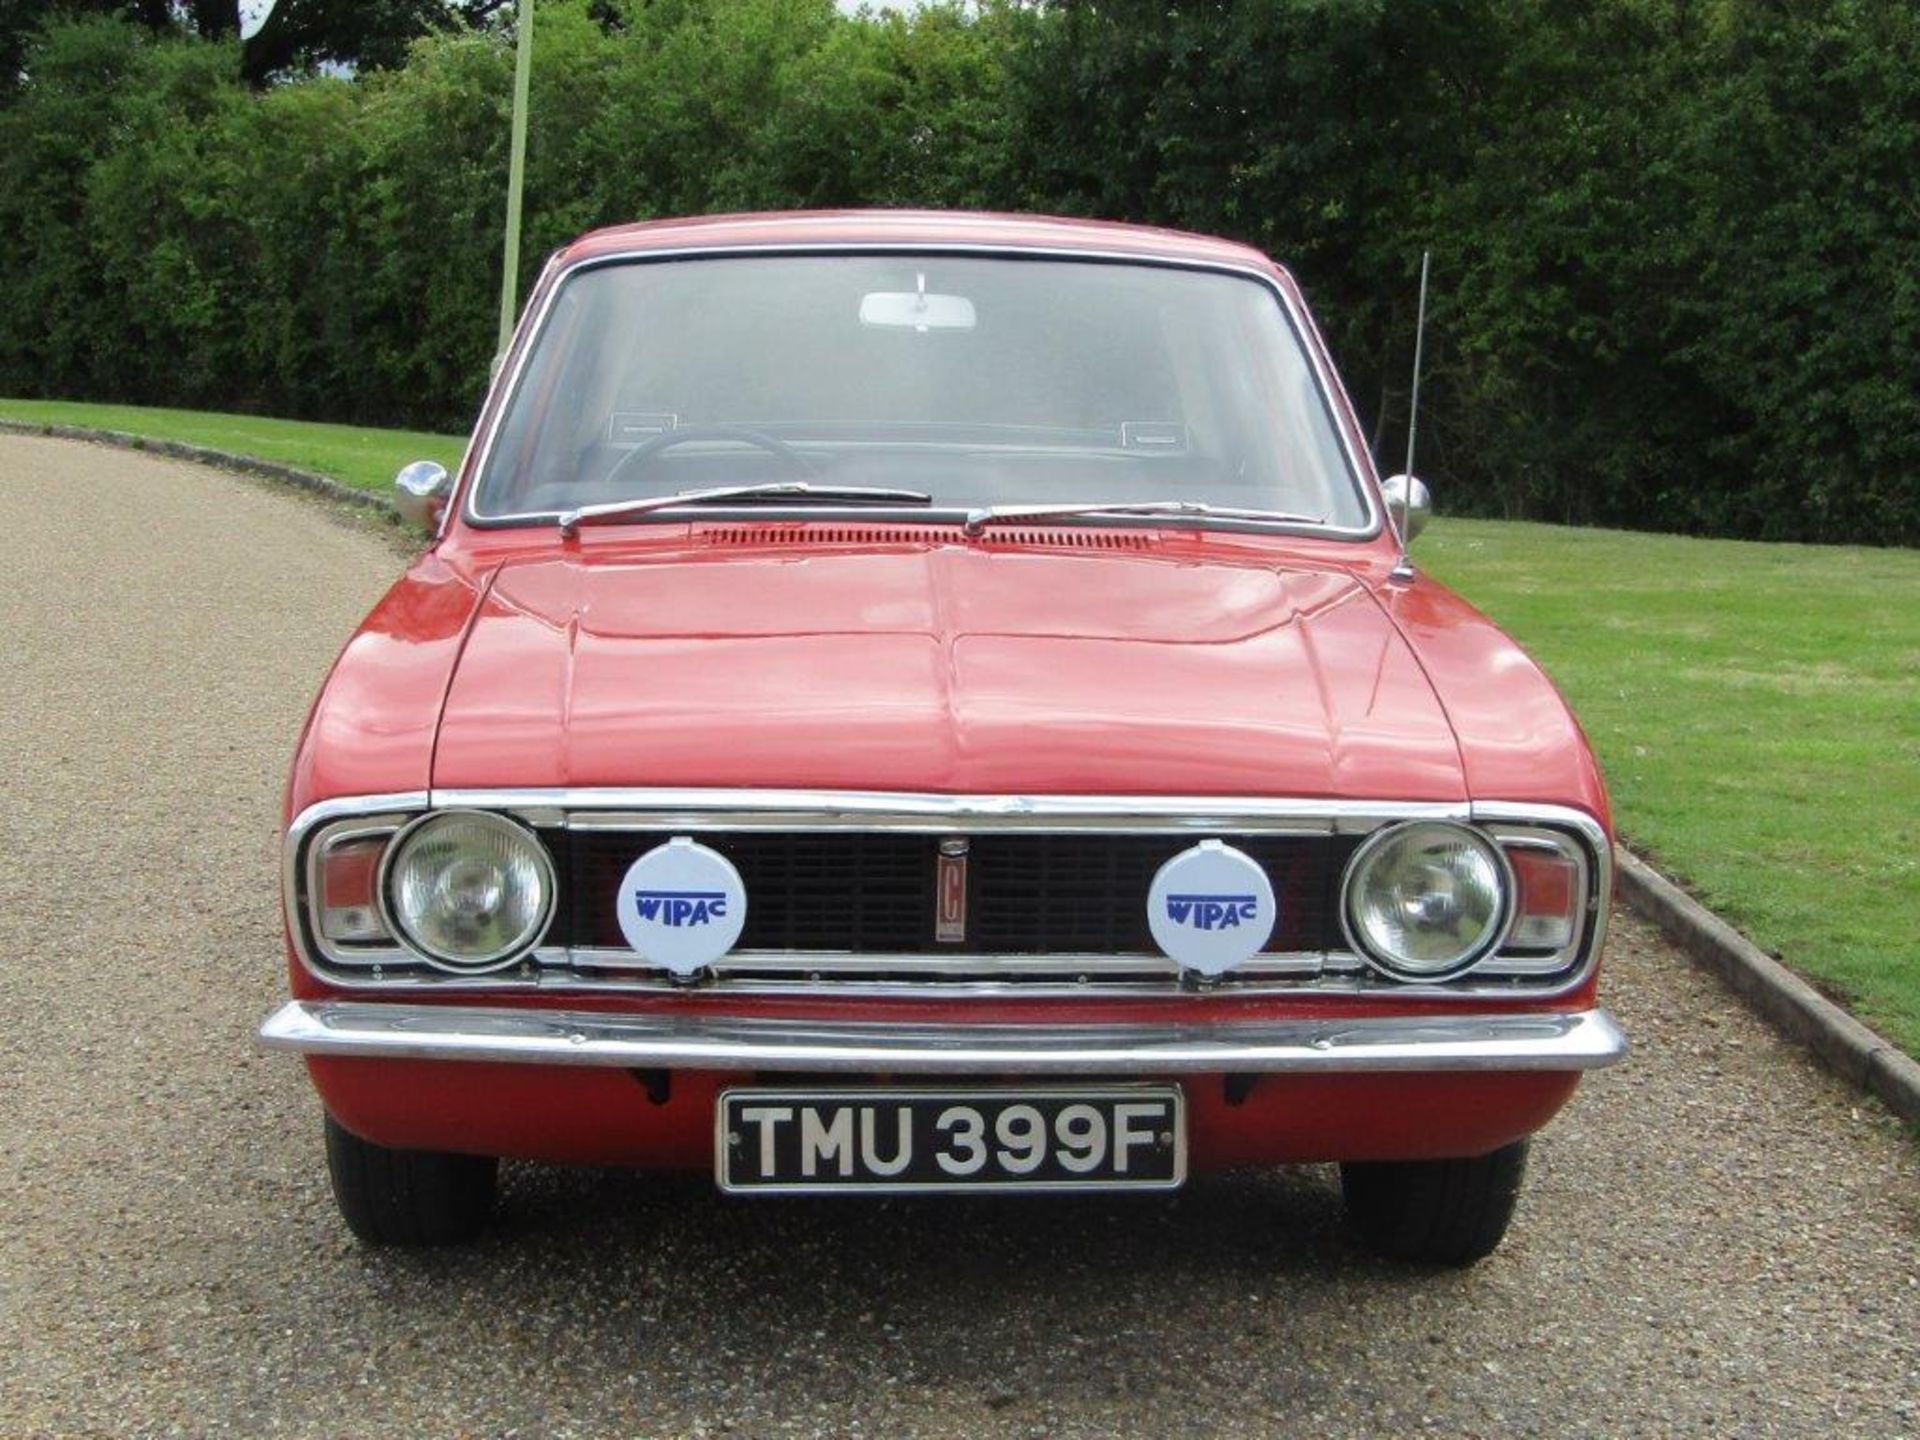 1968 Ford Cortina 1600 GT MKII - Image 2 of 11